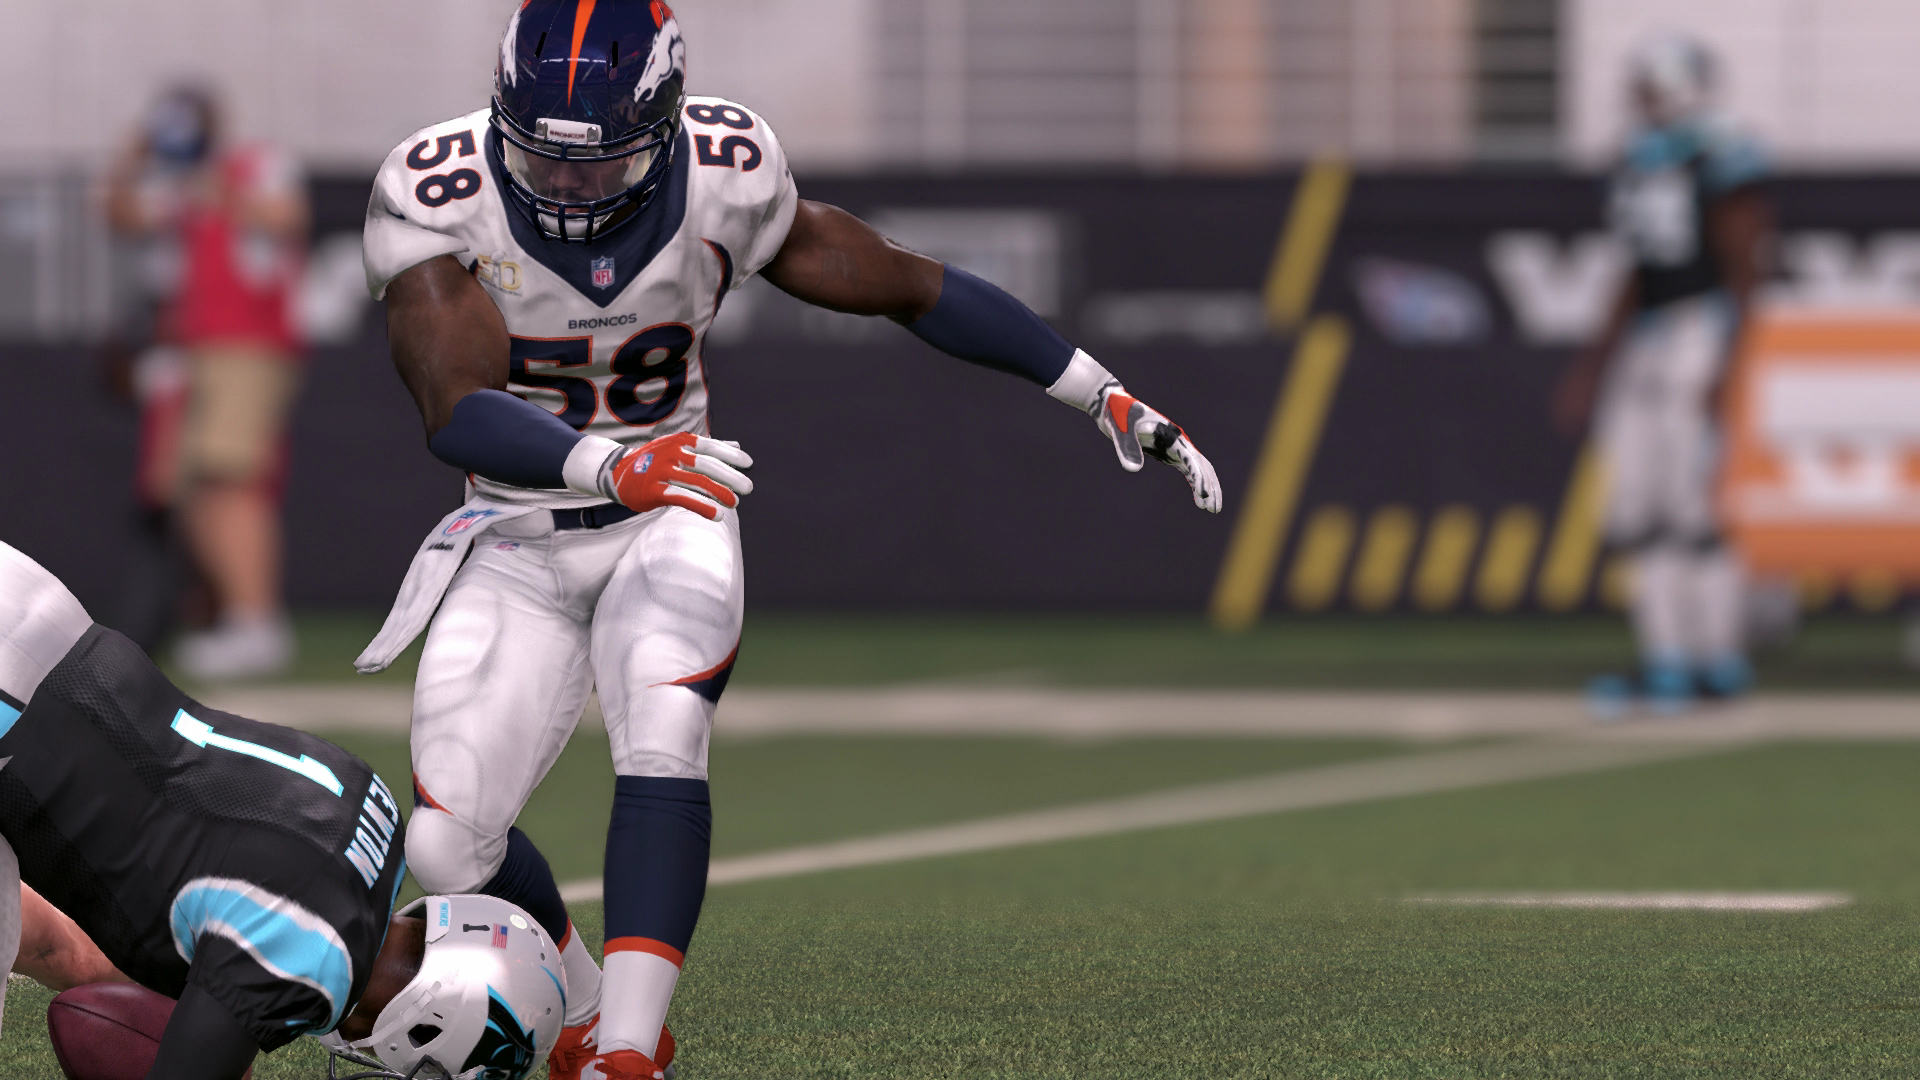 How Super Bowl 50 shapes up according to Madden NFL 16